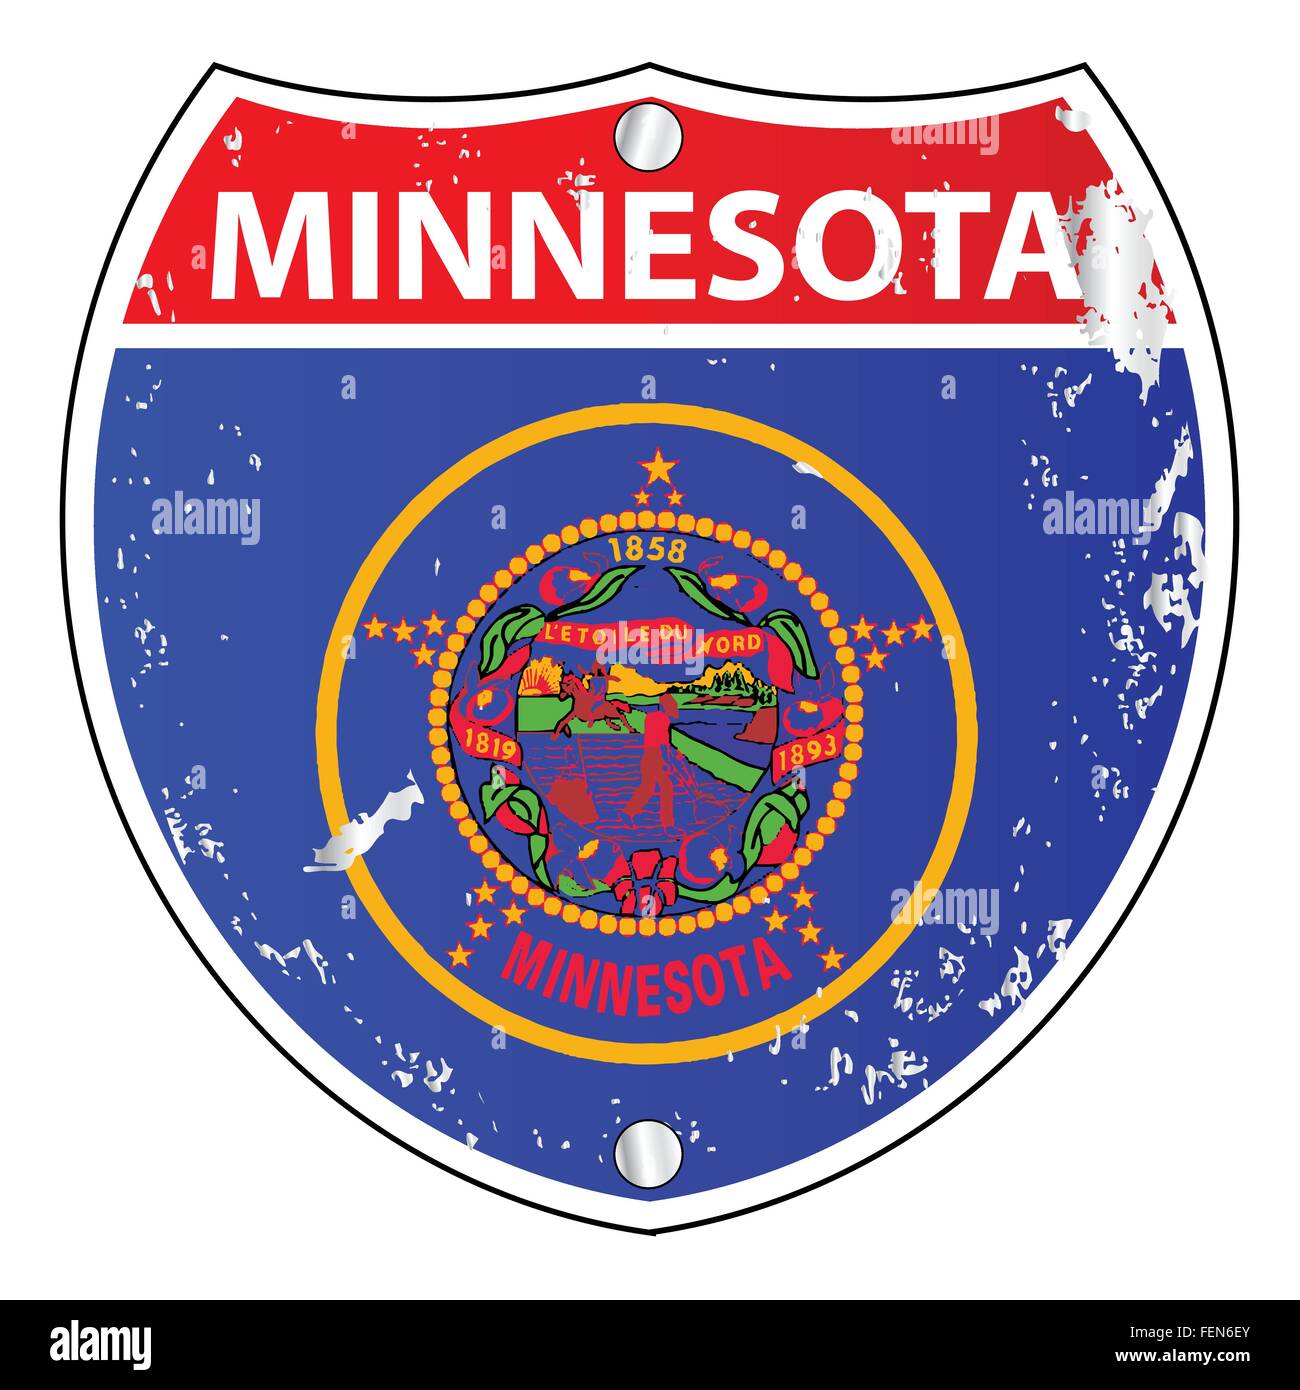 Minnesota flag icons as an interstate sign over a white background Stock Vector